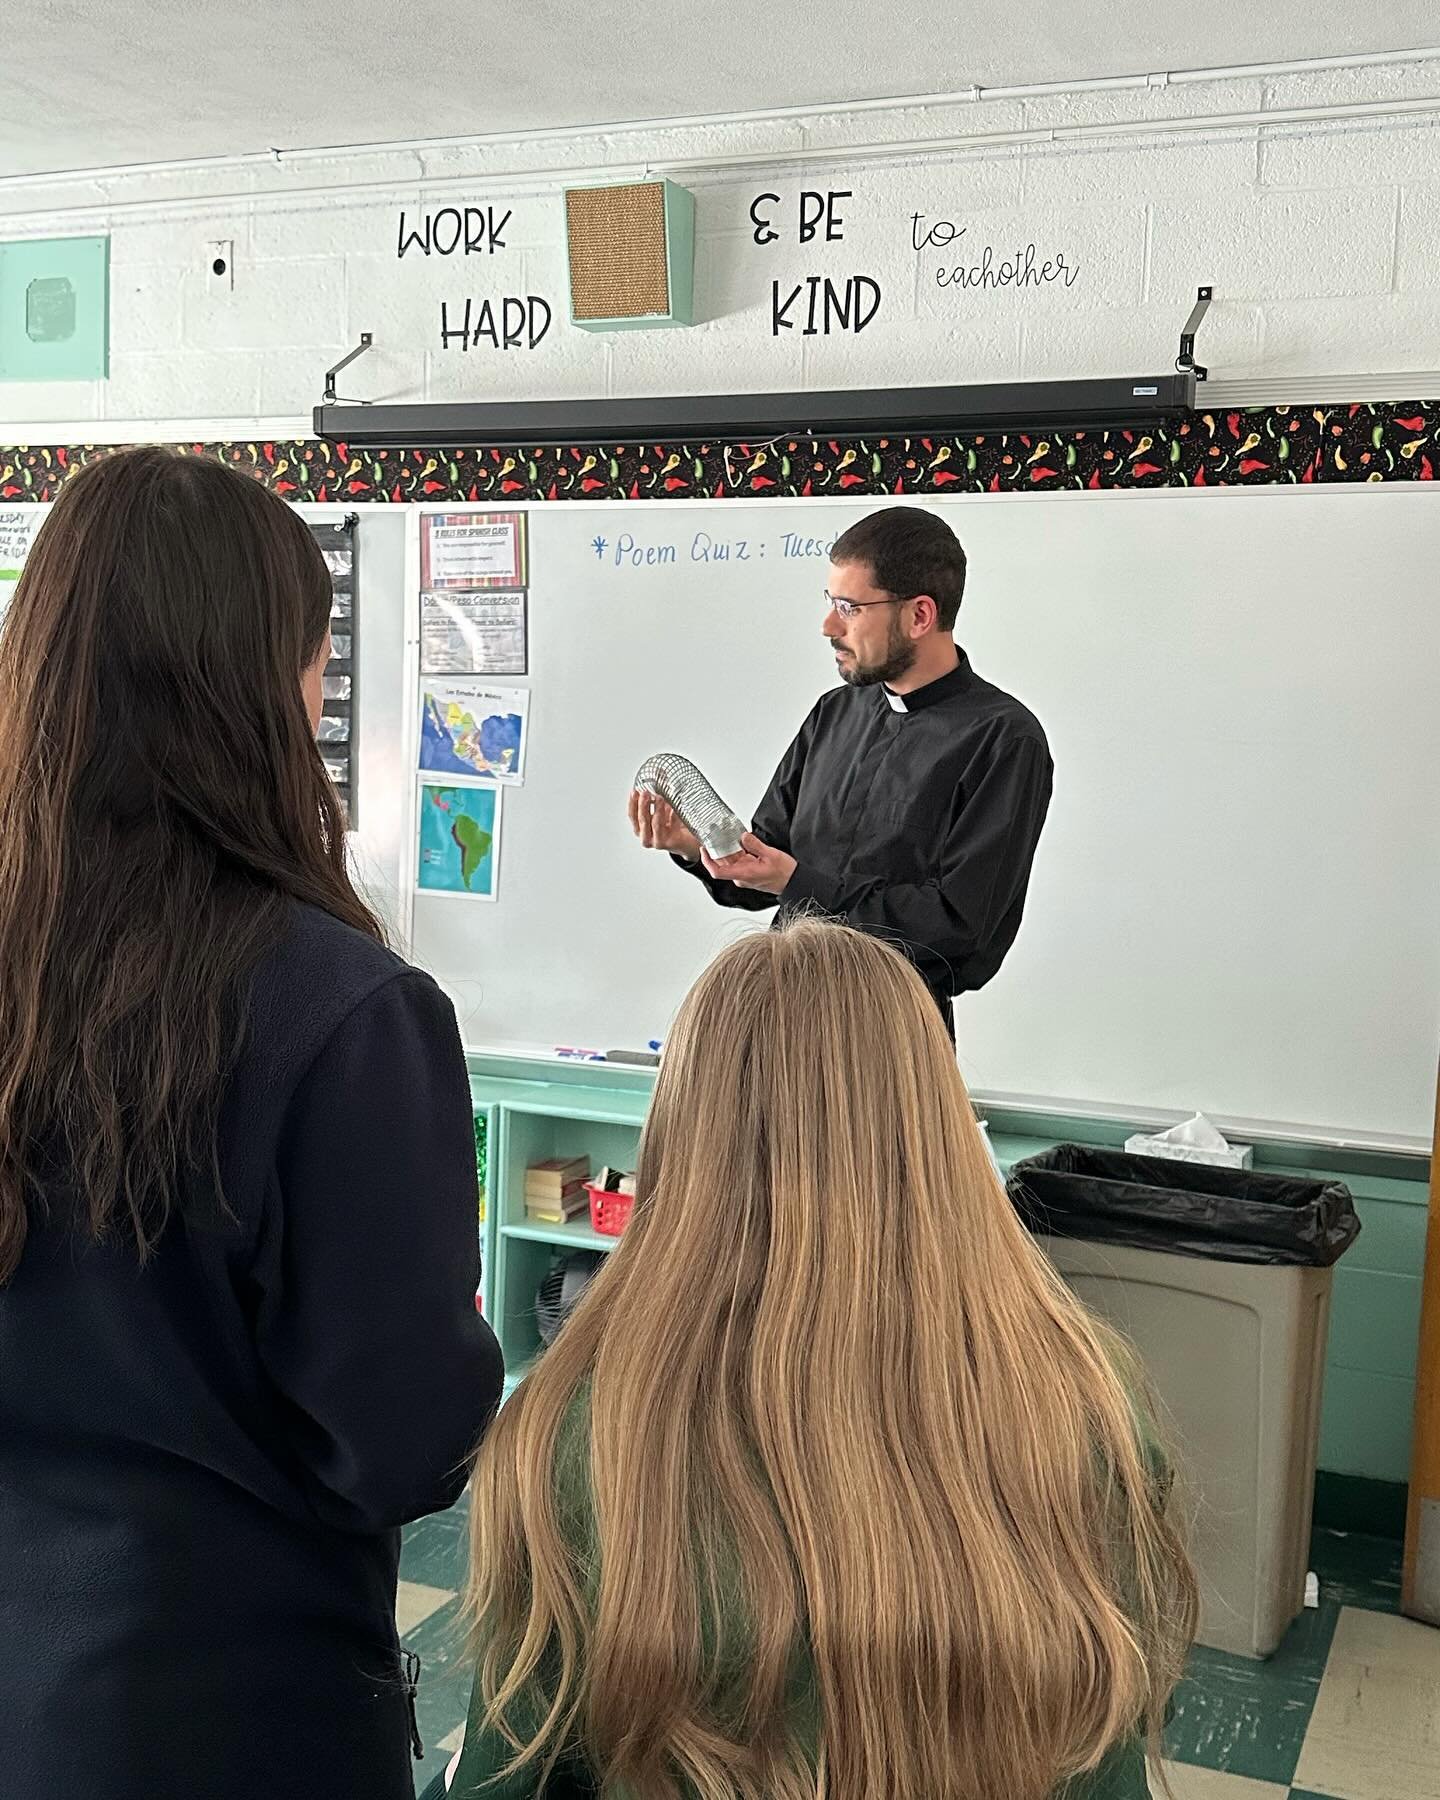 Father Patrick stopped in today to share with 7th grade how the Ascension is like a slinky! Jesus is in heaven, but we are connected to Him still as His body on Earth! ❤️ Thank you, Father Patrick!
.
.
.
#wearestpatsstoneham
#weriseup
#catholicschool